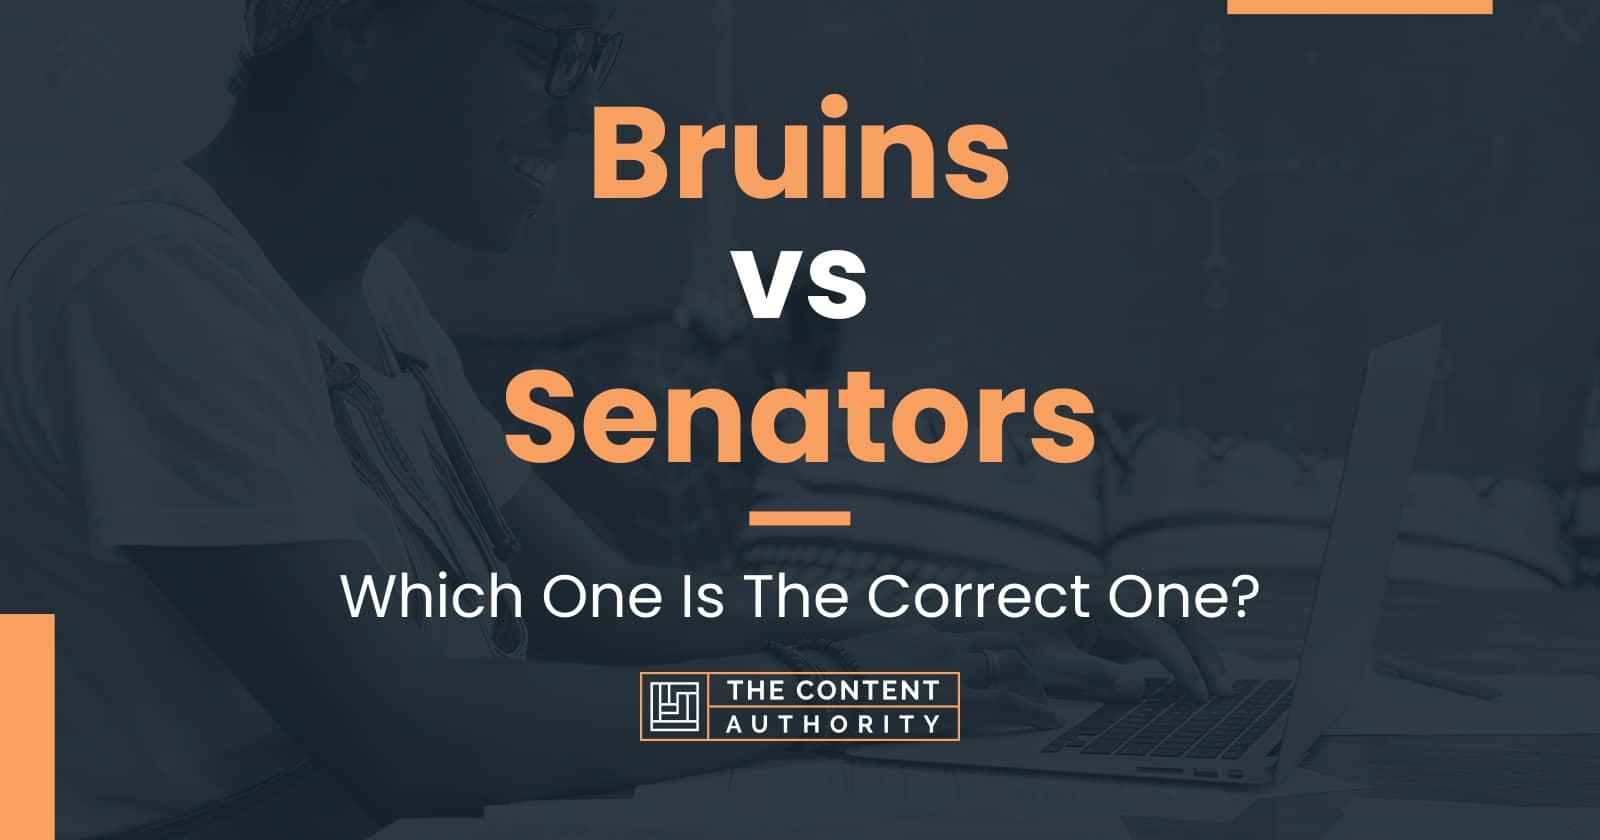 Bruins vs Senators Which One Is The Correct One?